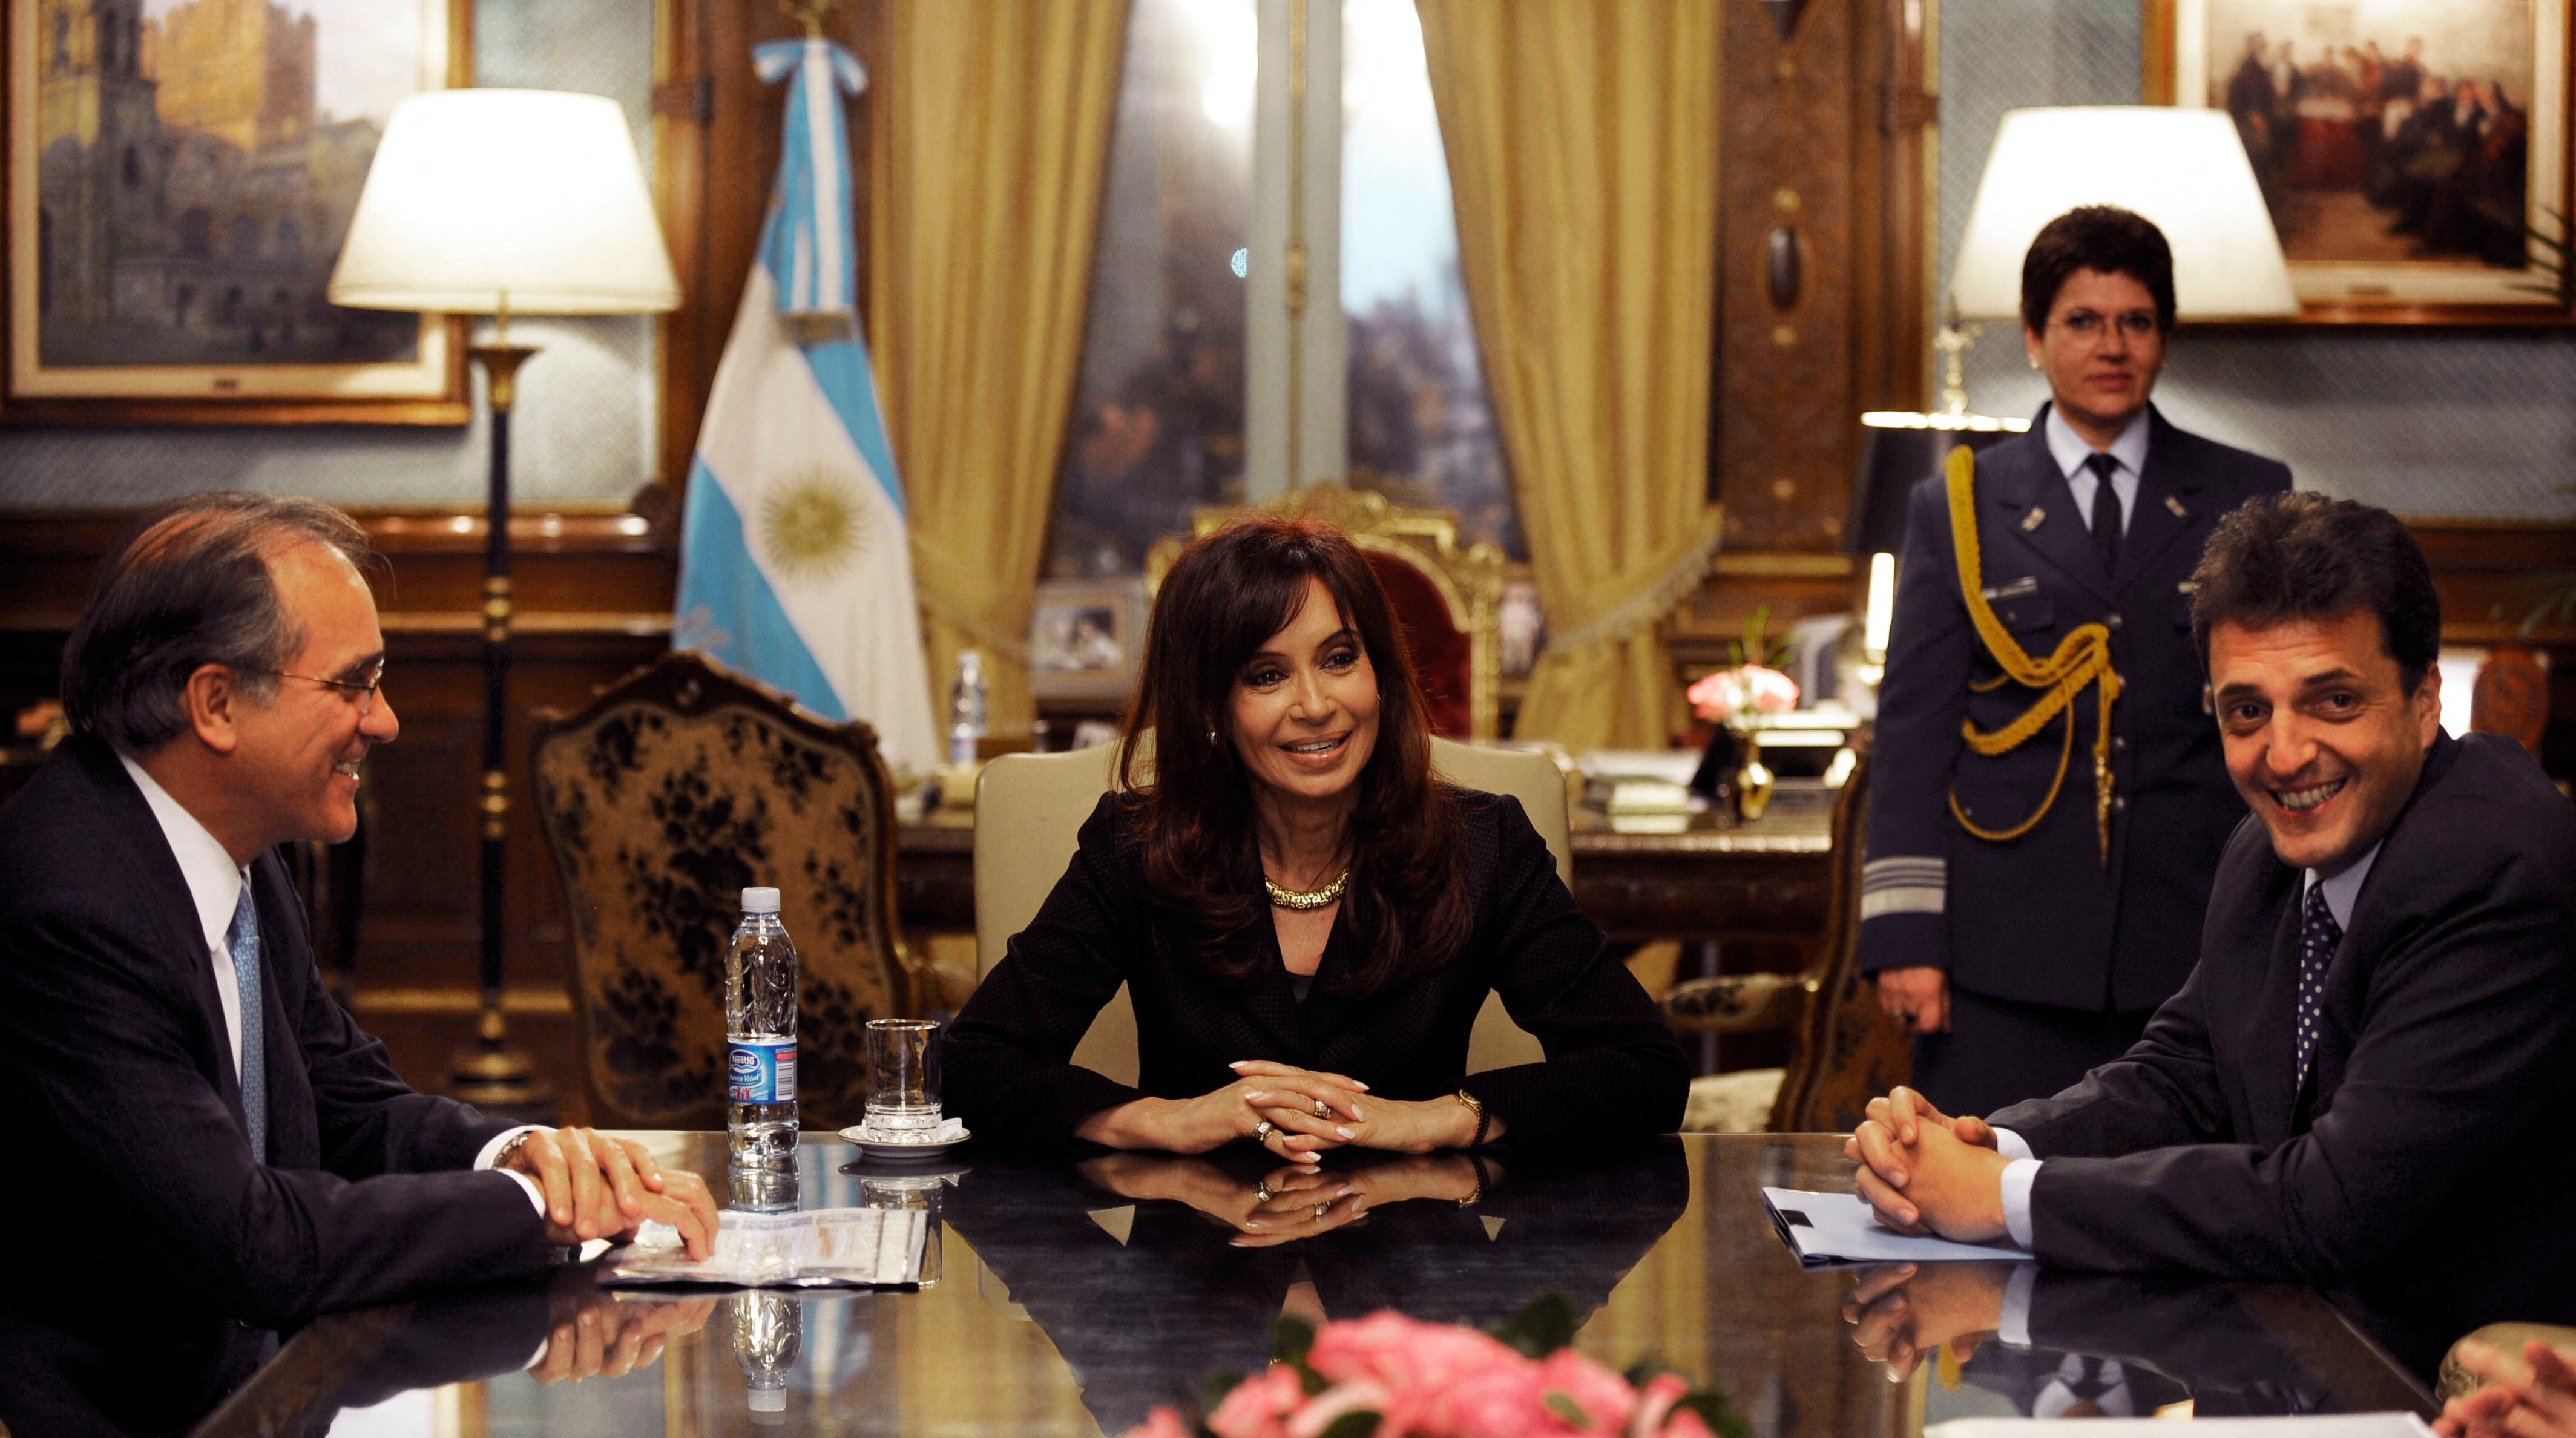 The then president of Argentina Cristina Kirchner and her chief of staff Sergio Massa (right) in image from September 29, 2008. (Photo by DANIEL GARCIA / AFP).